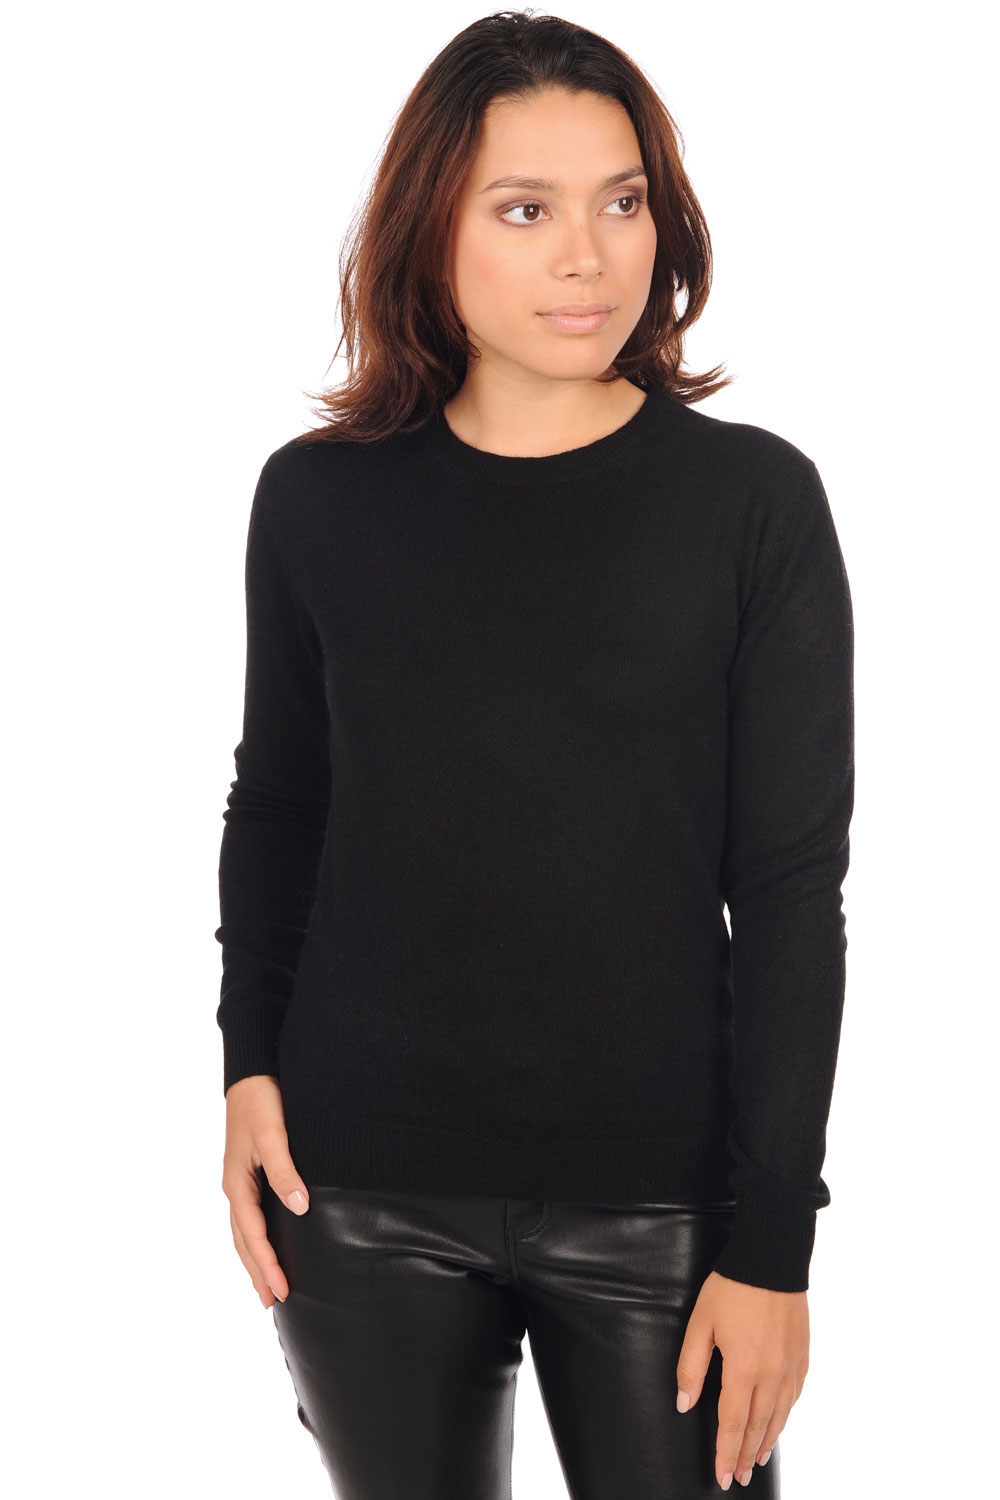 Cashmere ladies spring summer collection thalia first black s